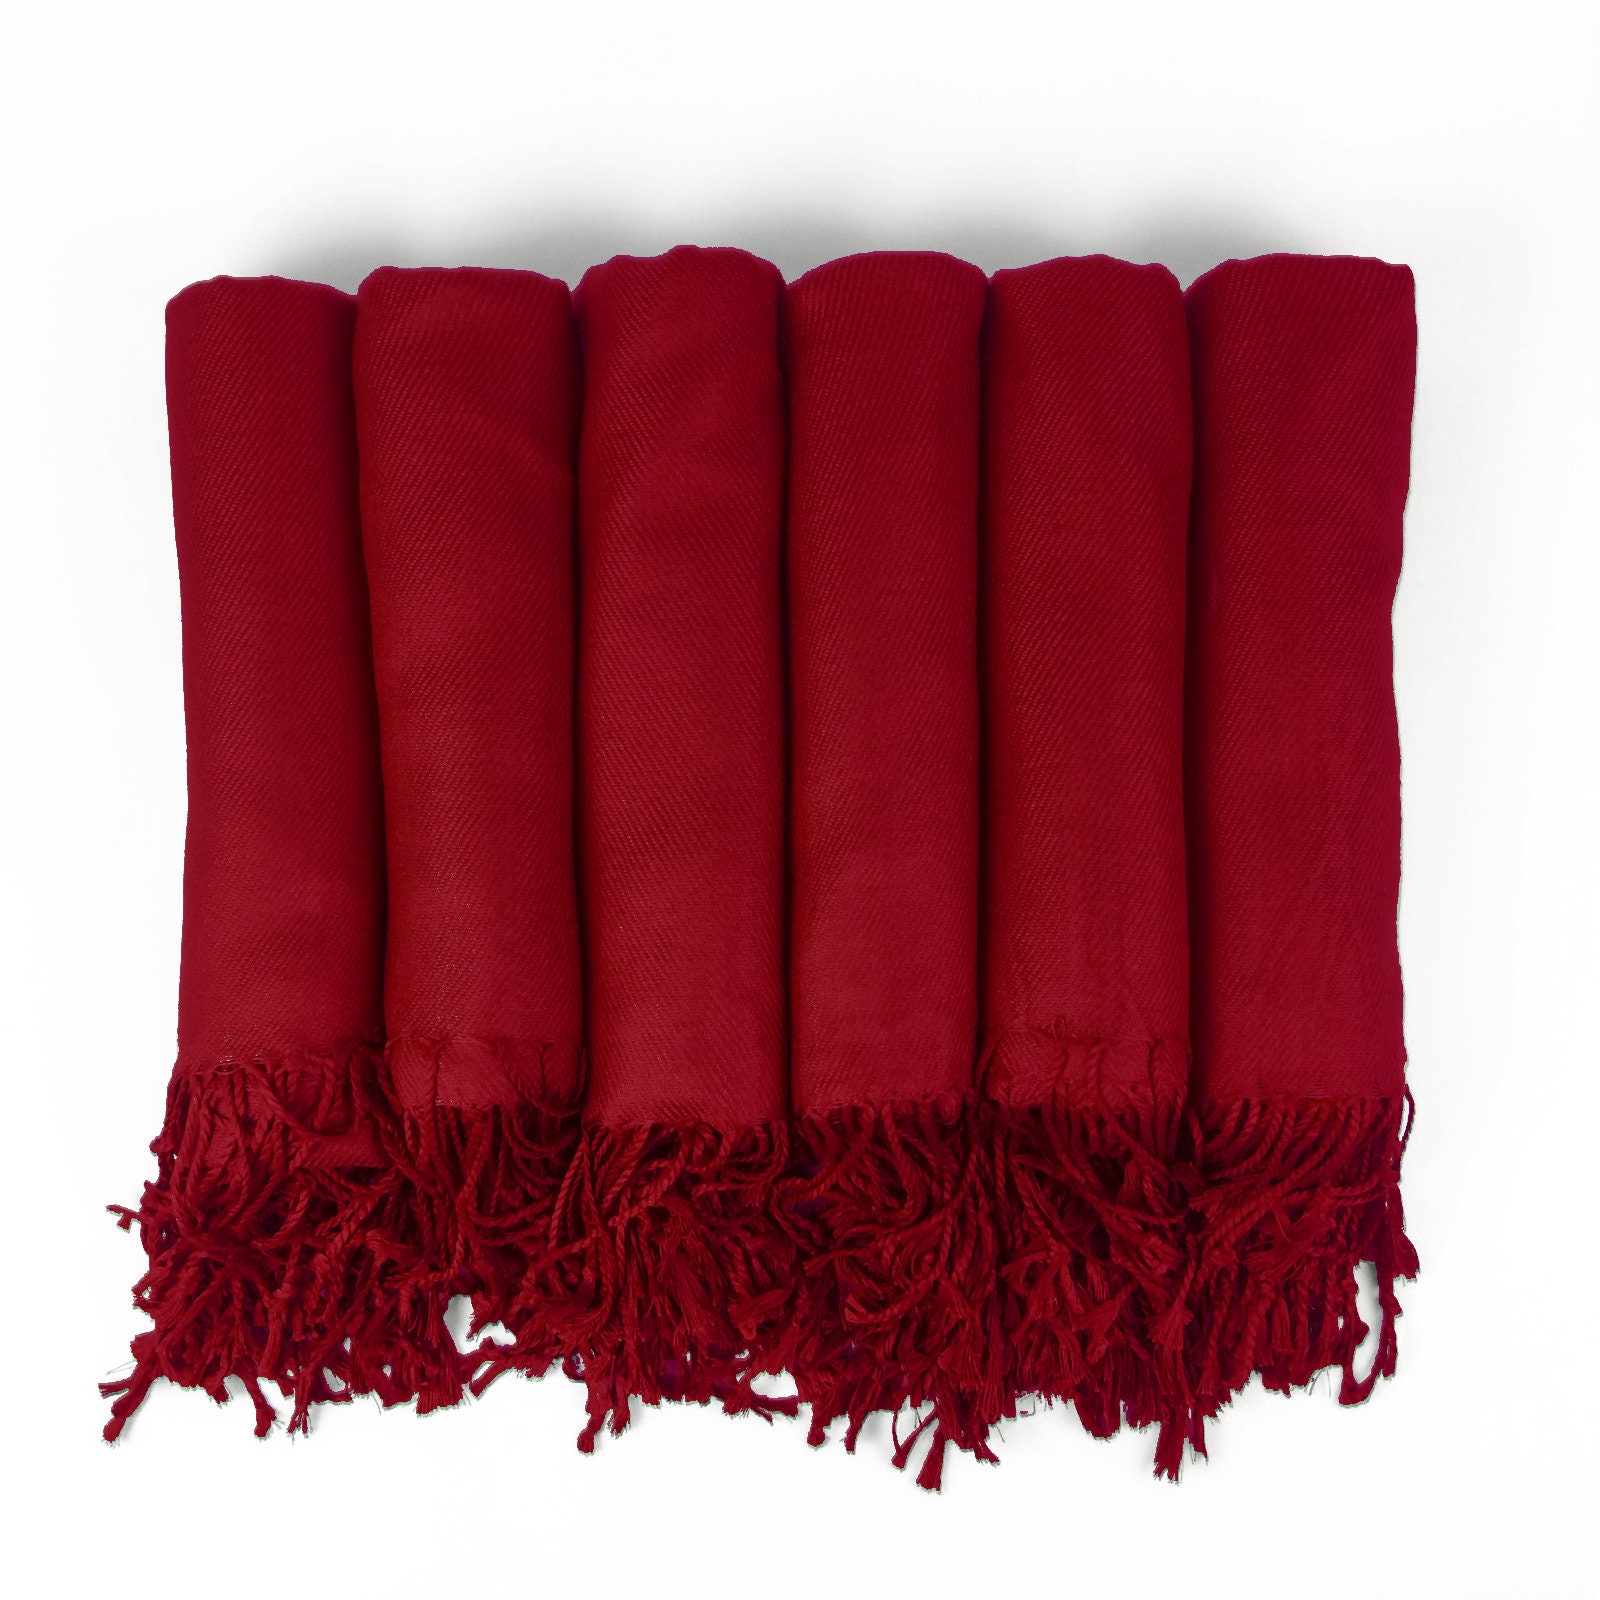 Set Of 2, 3, 4, 5, 6, 7, 8, 9 Or 10 Pashmina Shawls in Ruby Red - Bridesmaid Gift, Wedding Favor Monogrammable